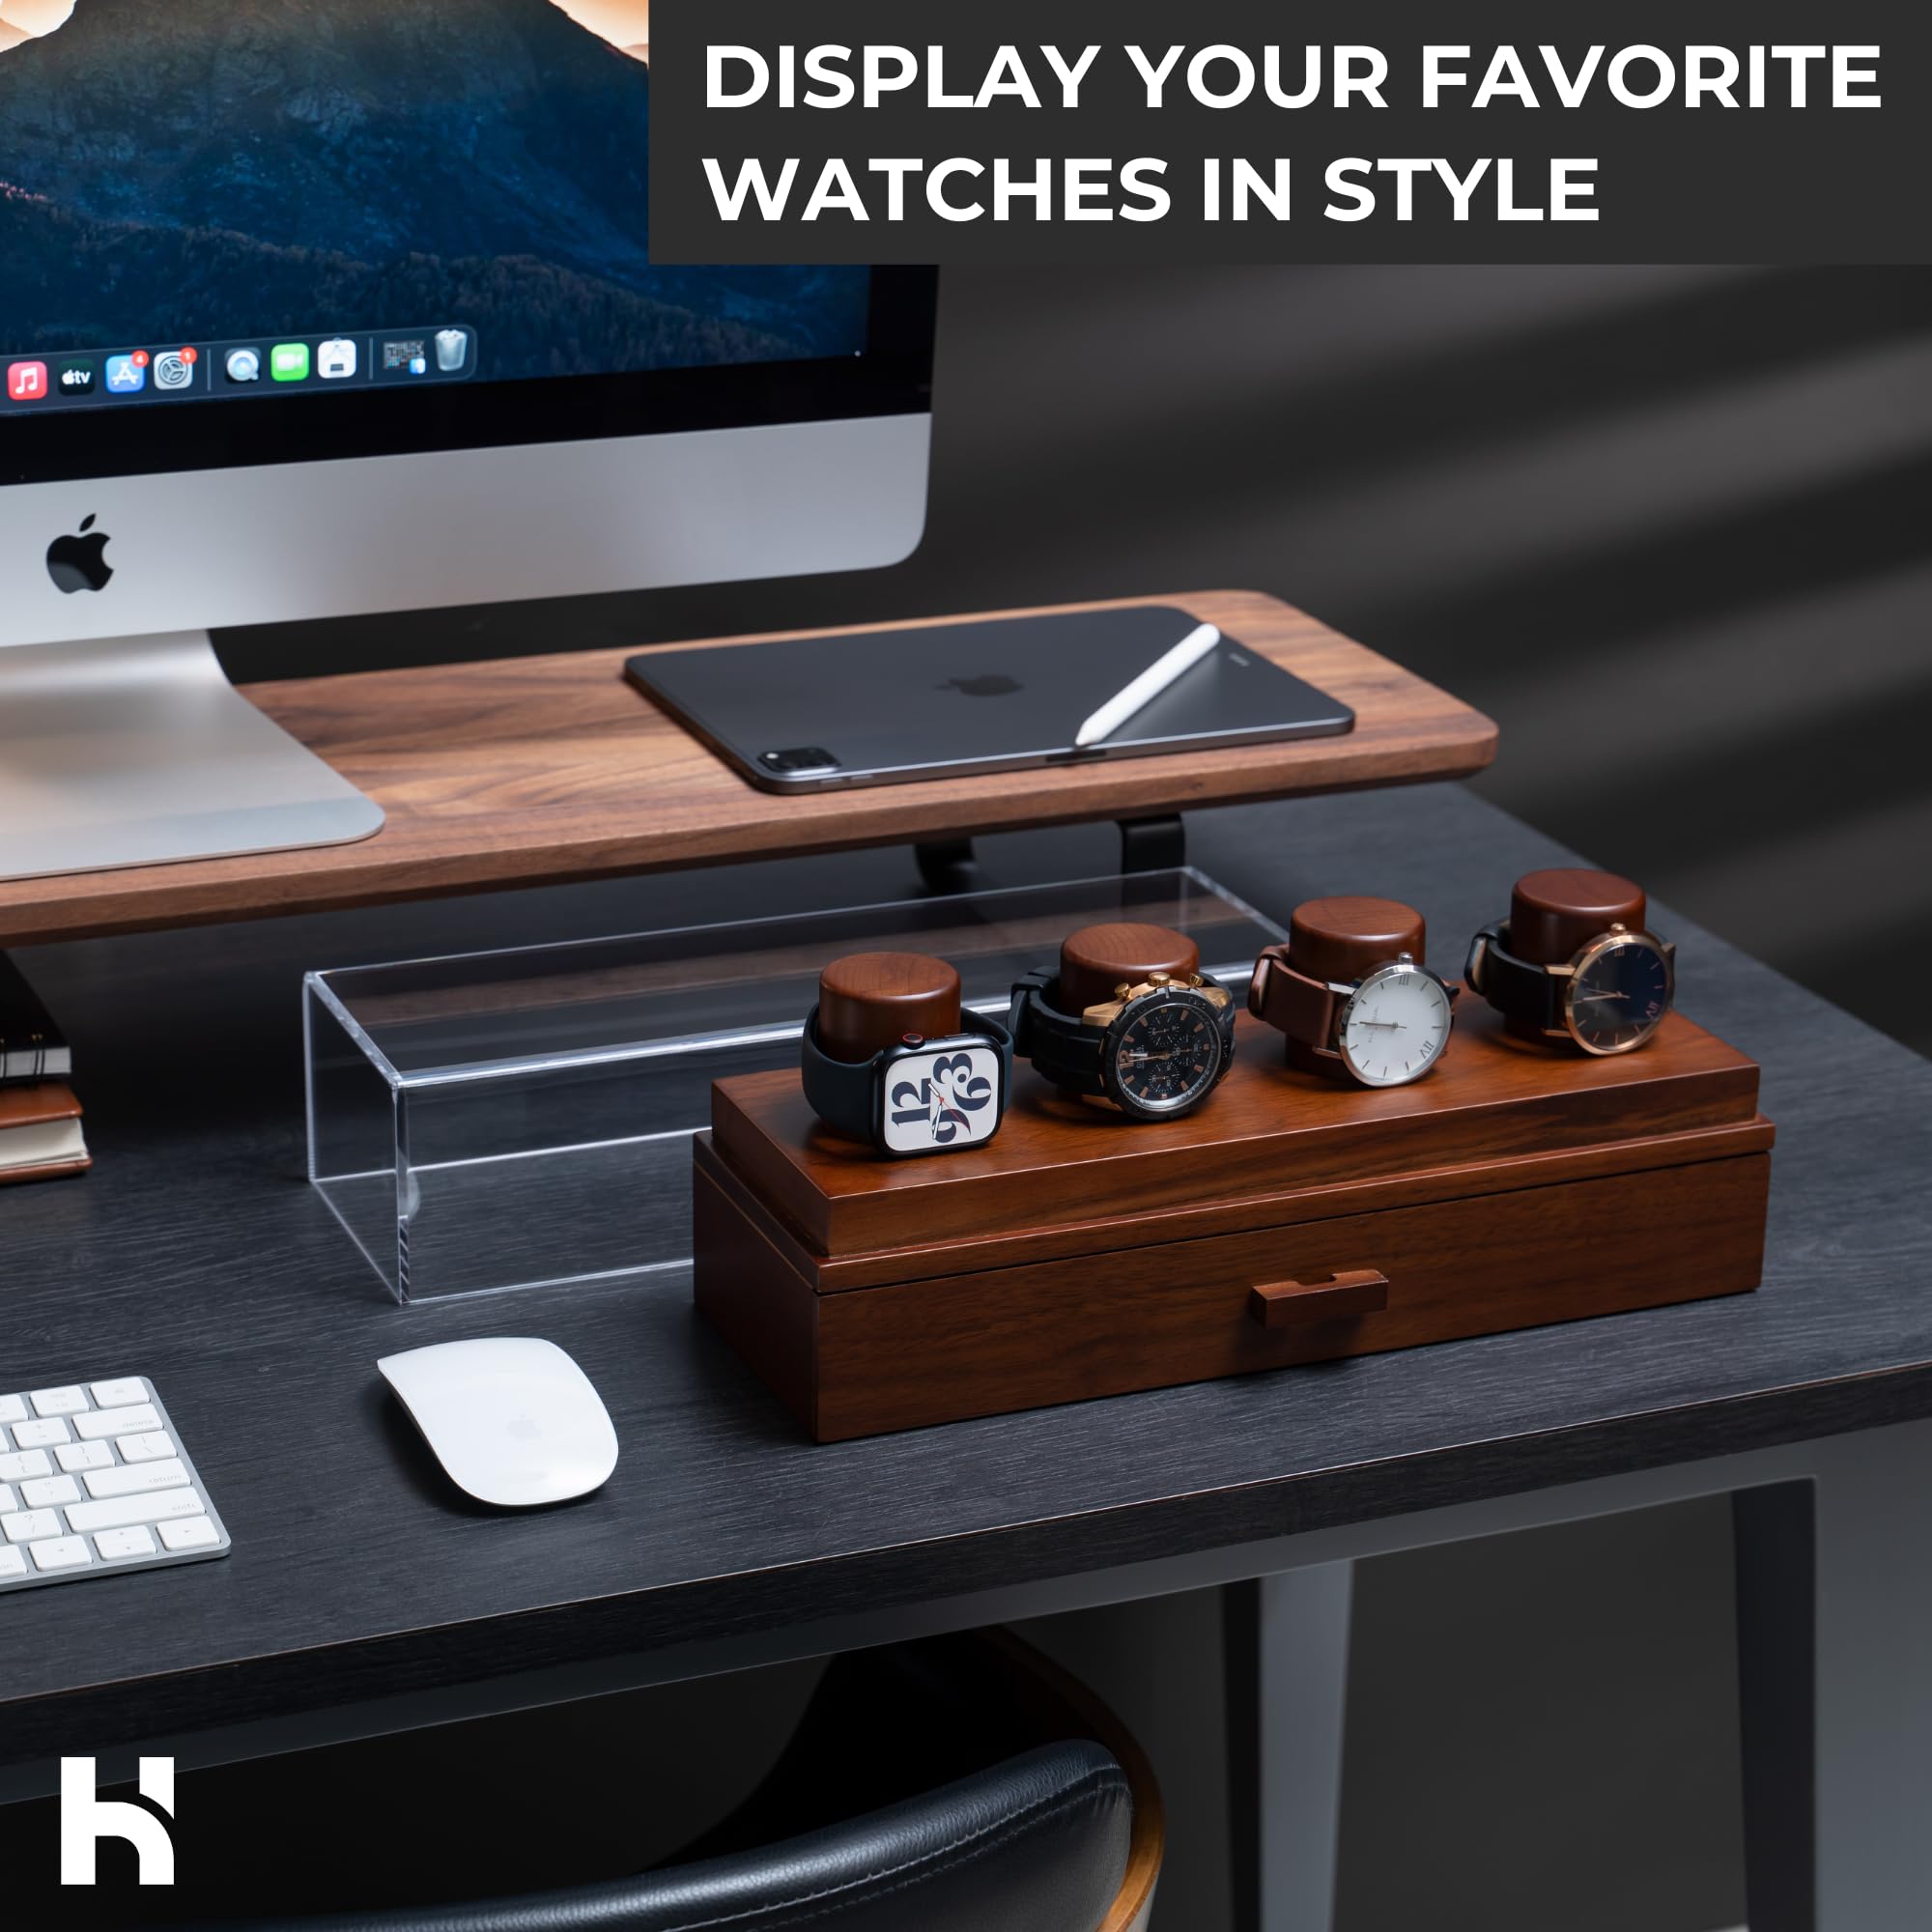 Watch Holder And Display Case/Box Organizer with Drawer for Accessories - Wooden - Gift for Men Boyfriend Husband Father Son - Walnut